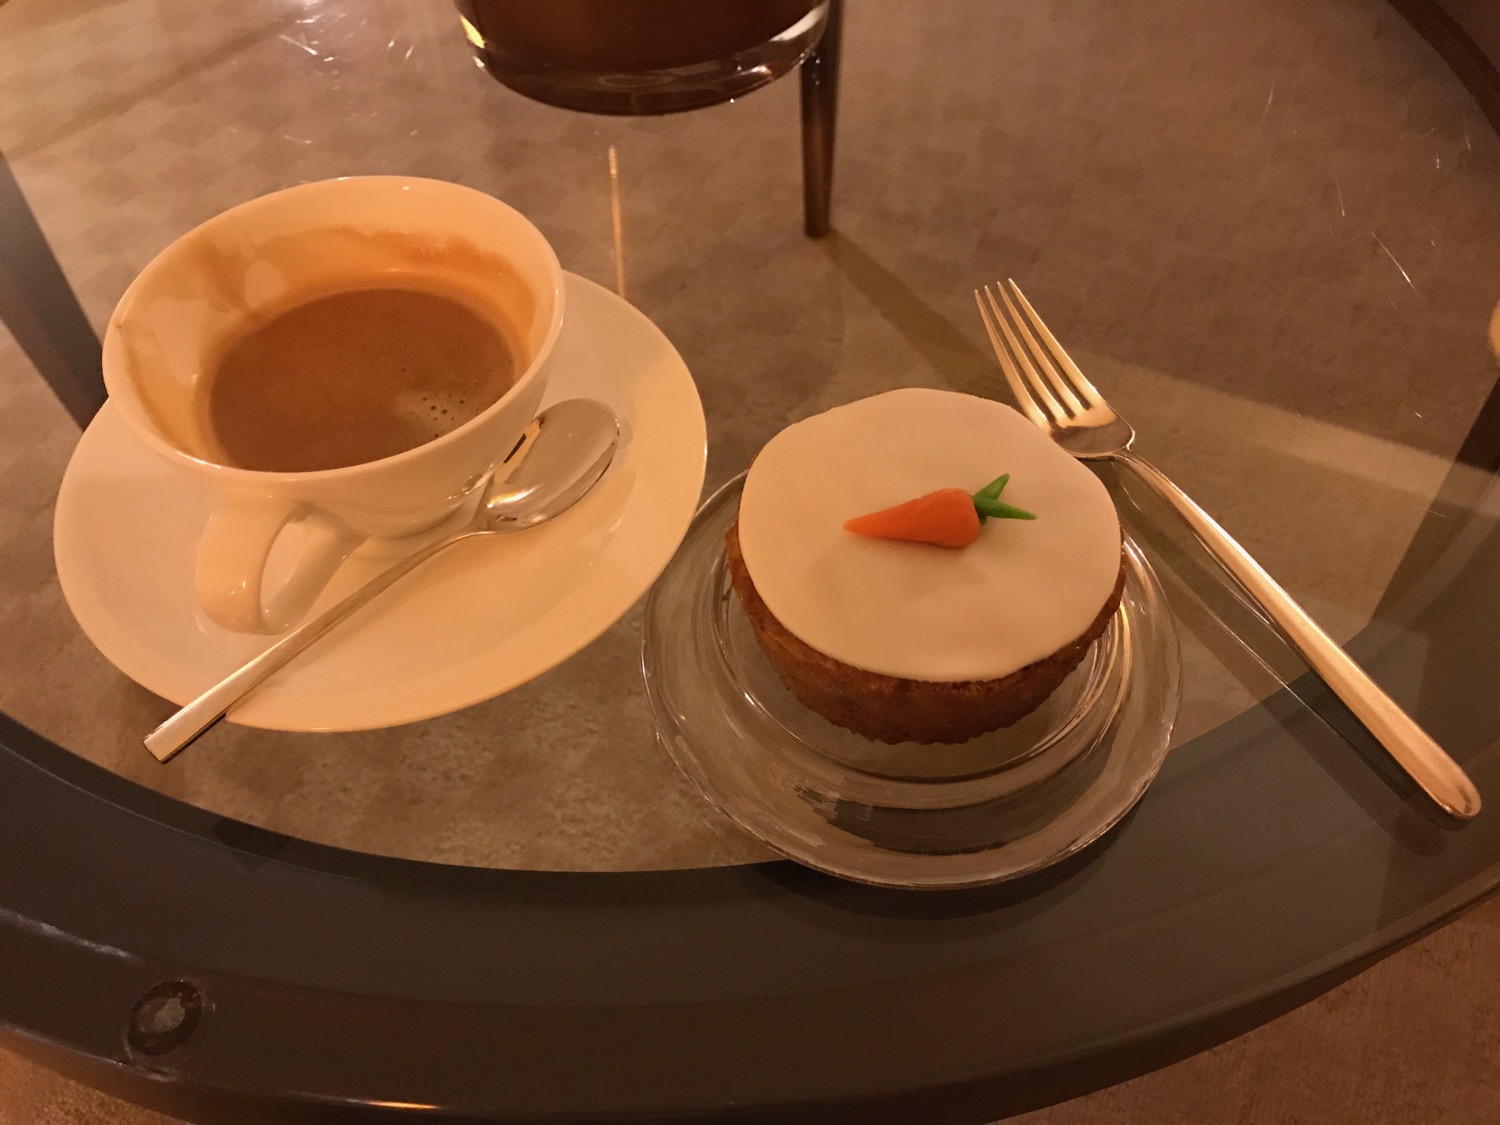 a cupcake and a cup of coffee on a glass table